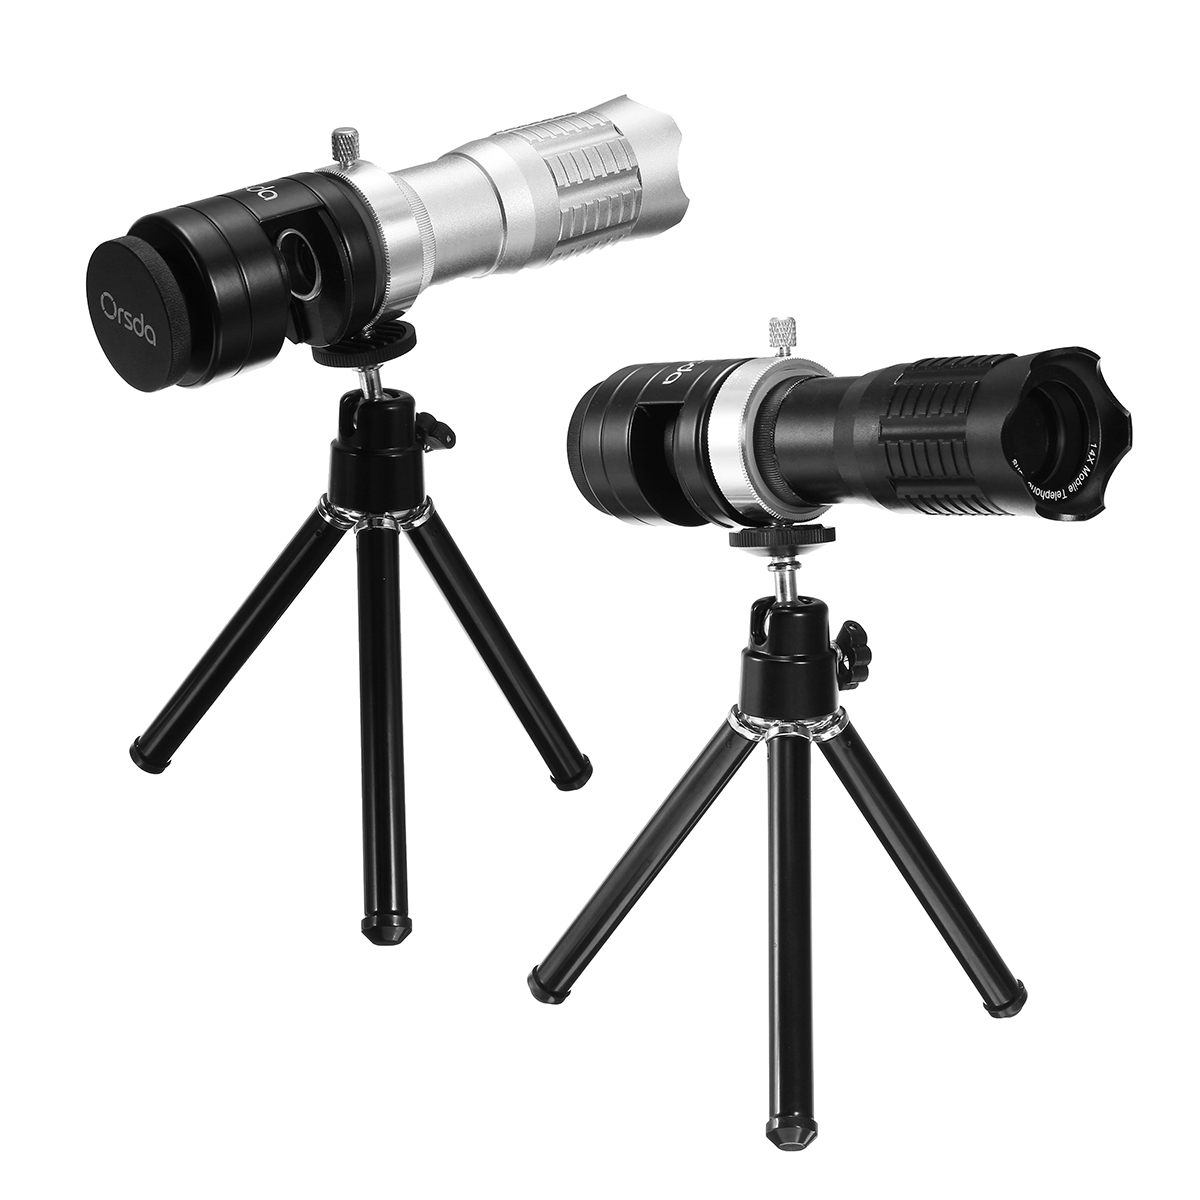 

Universal 14X Zoom Wide Angle Camera Mobile Lens Telescope Phone Clip+Tripod Holder for Smartphone